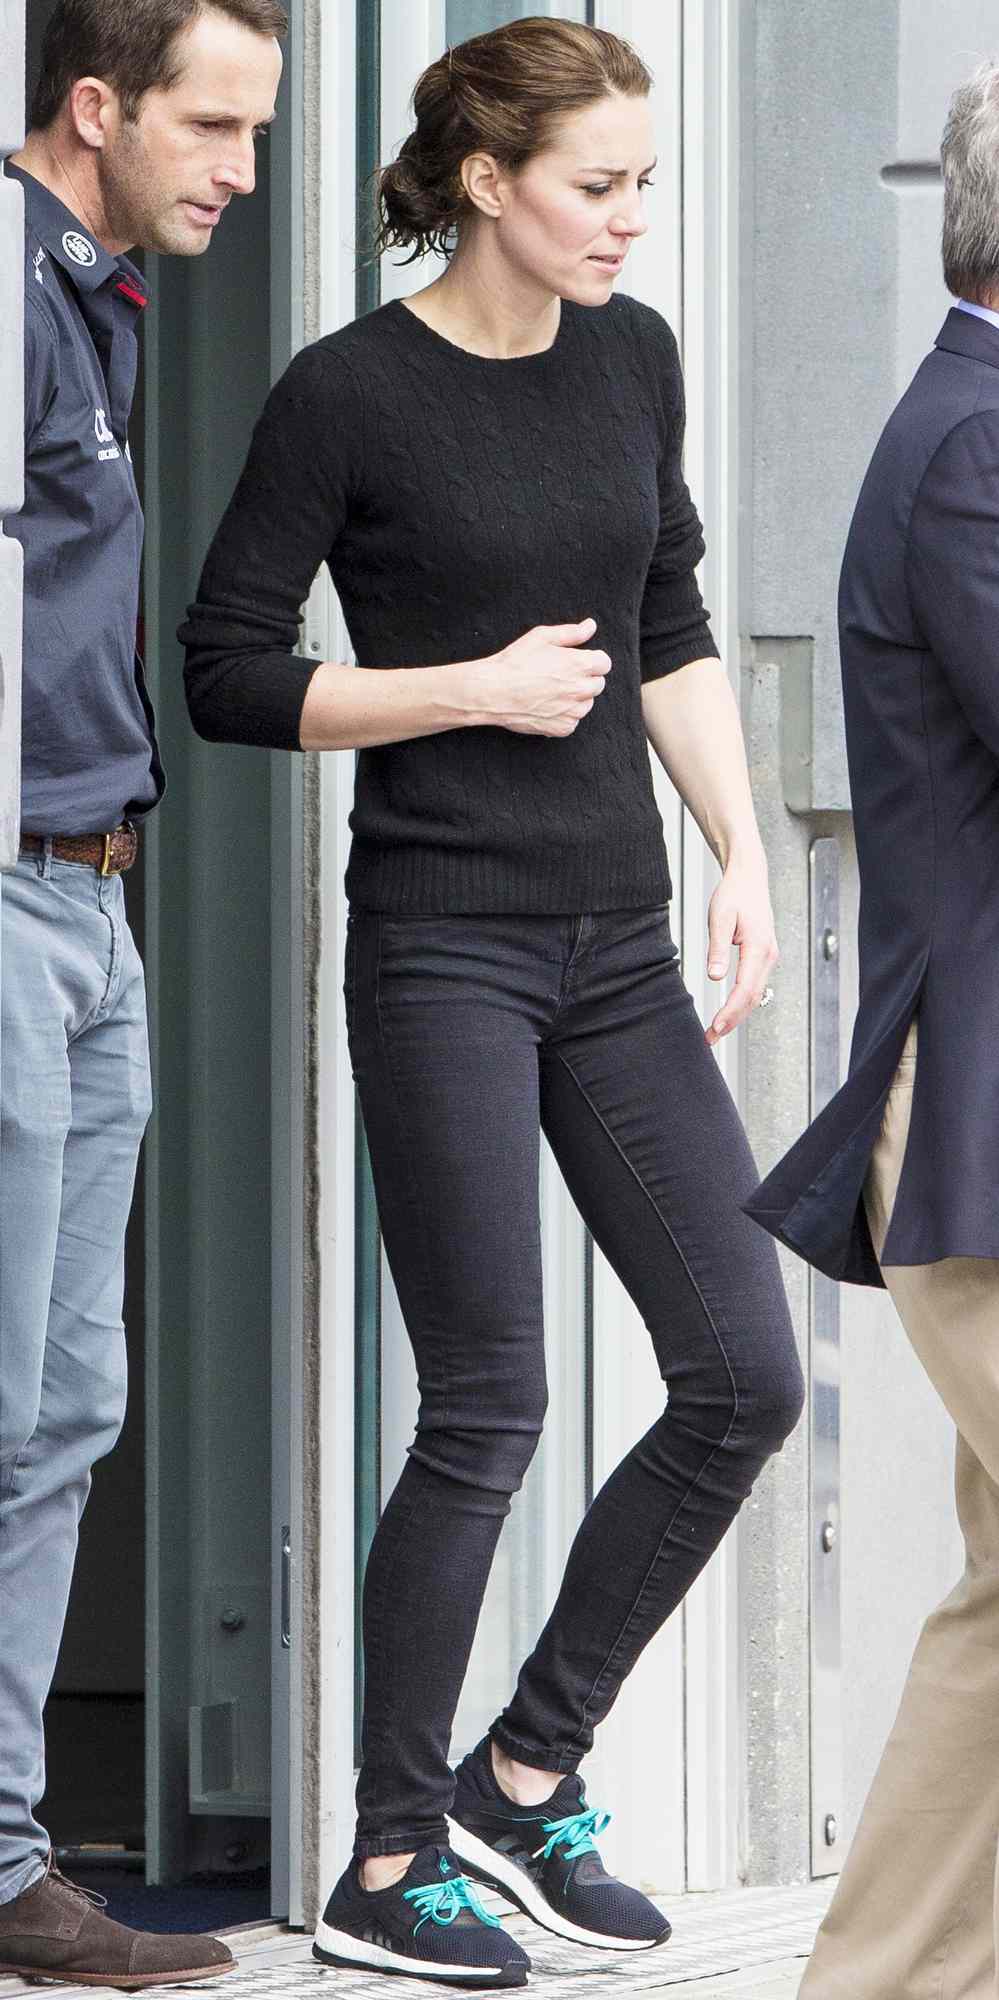 Kate Middleton in a black sweater, skinny jeans, and sneakers